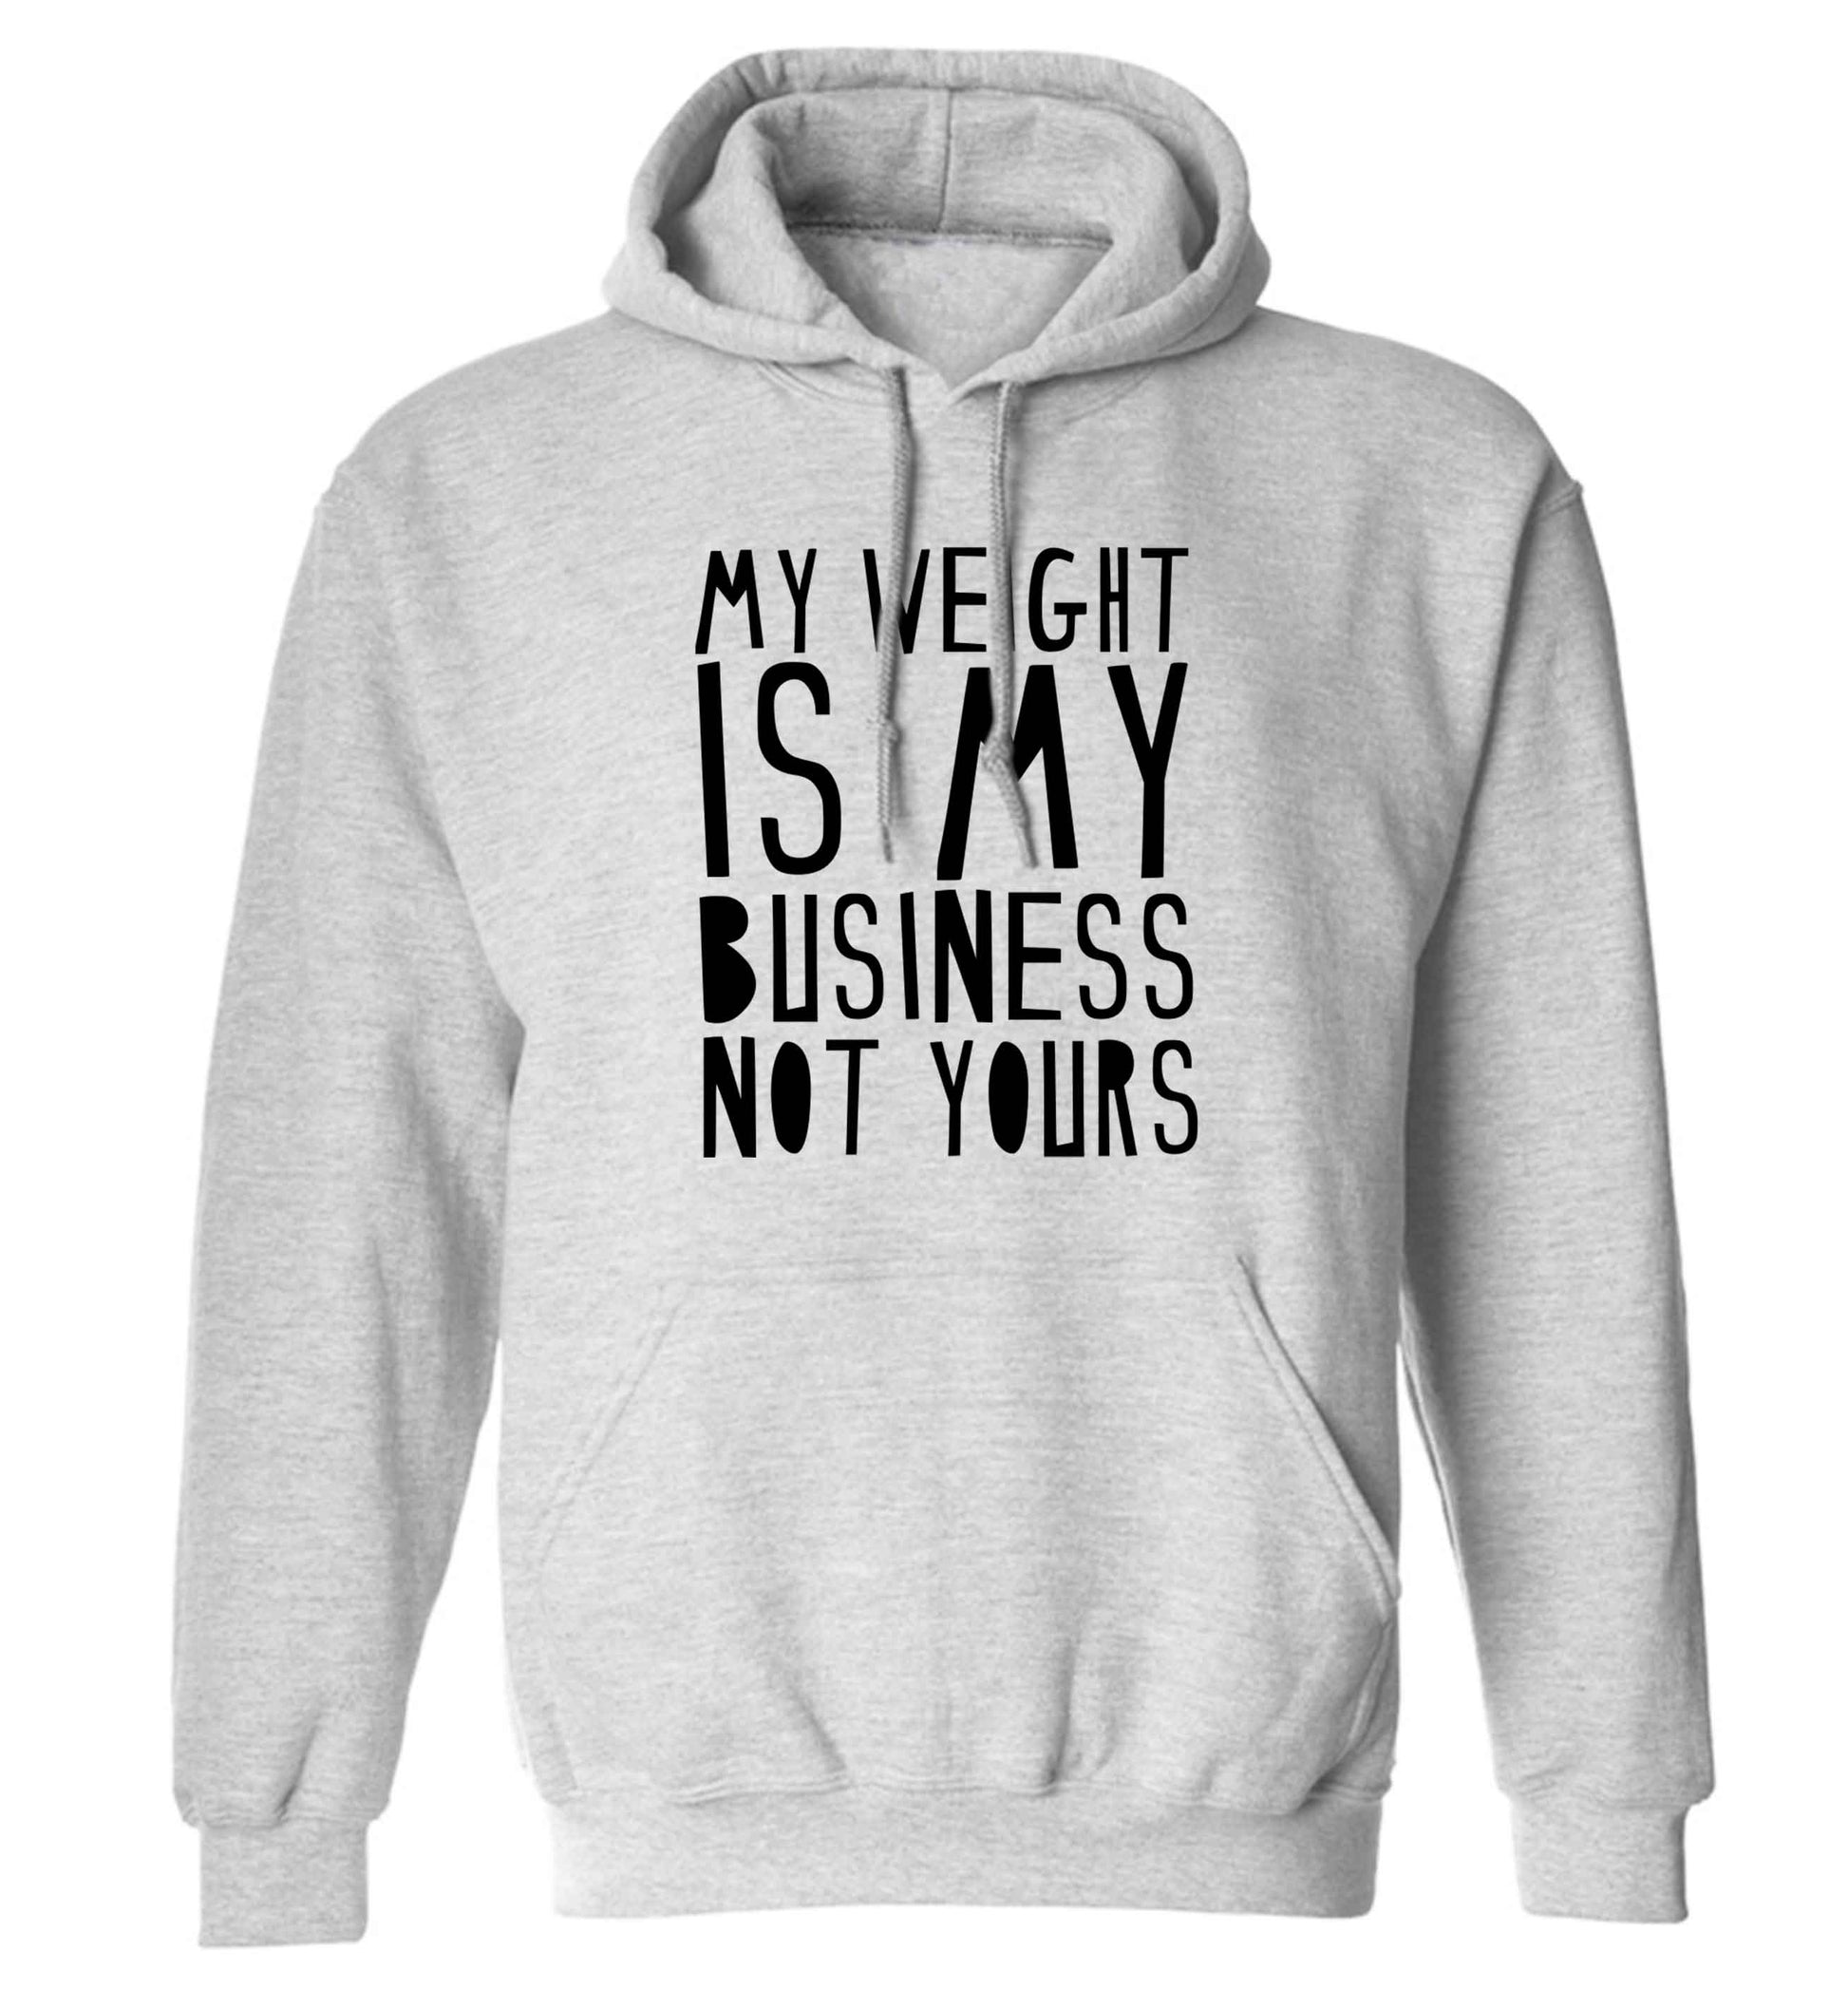 My weight is my business not yours adults unisex grey hoodie 2XL